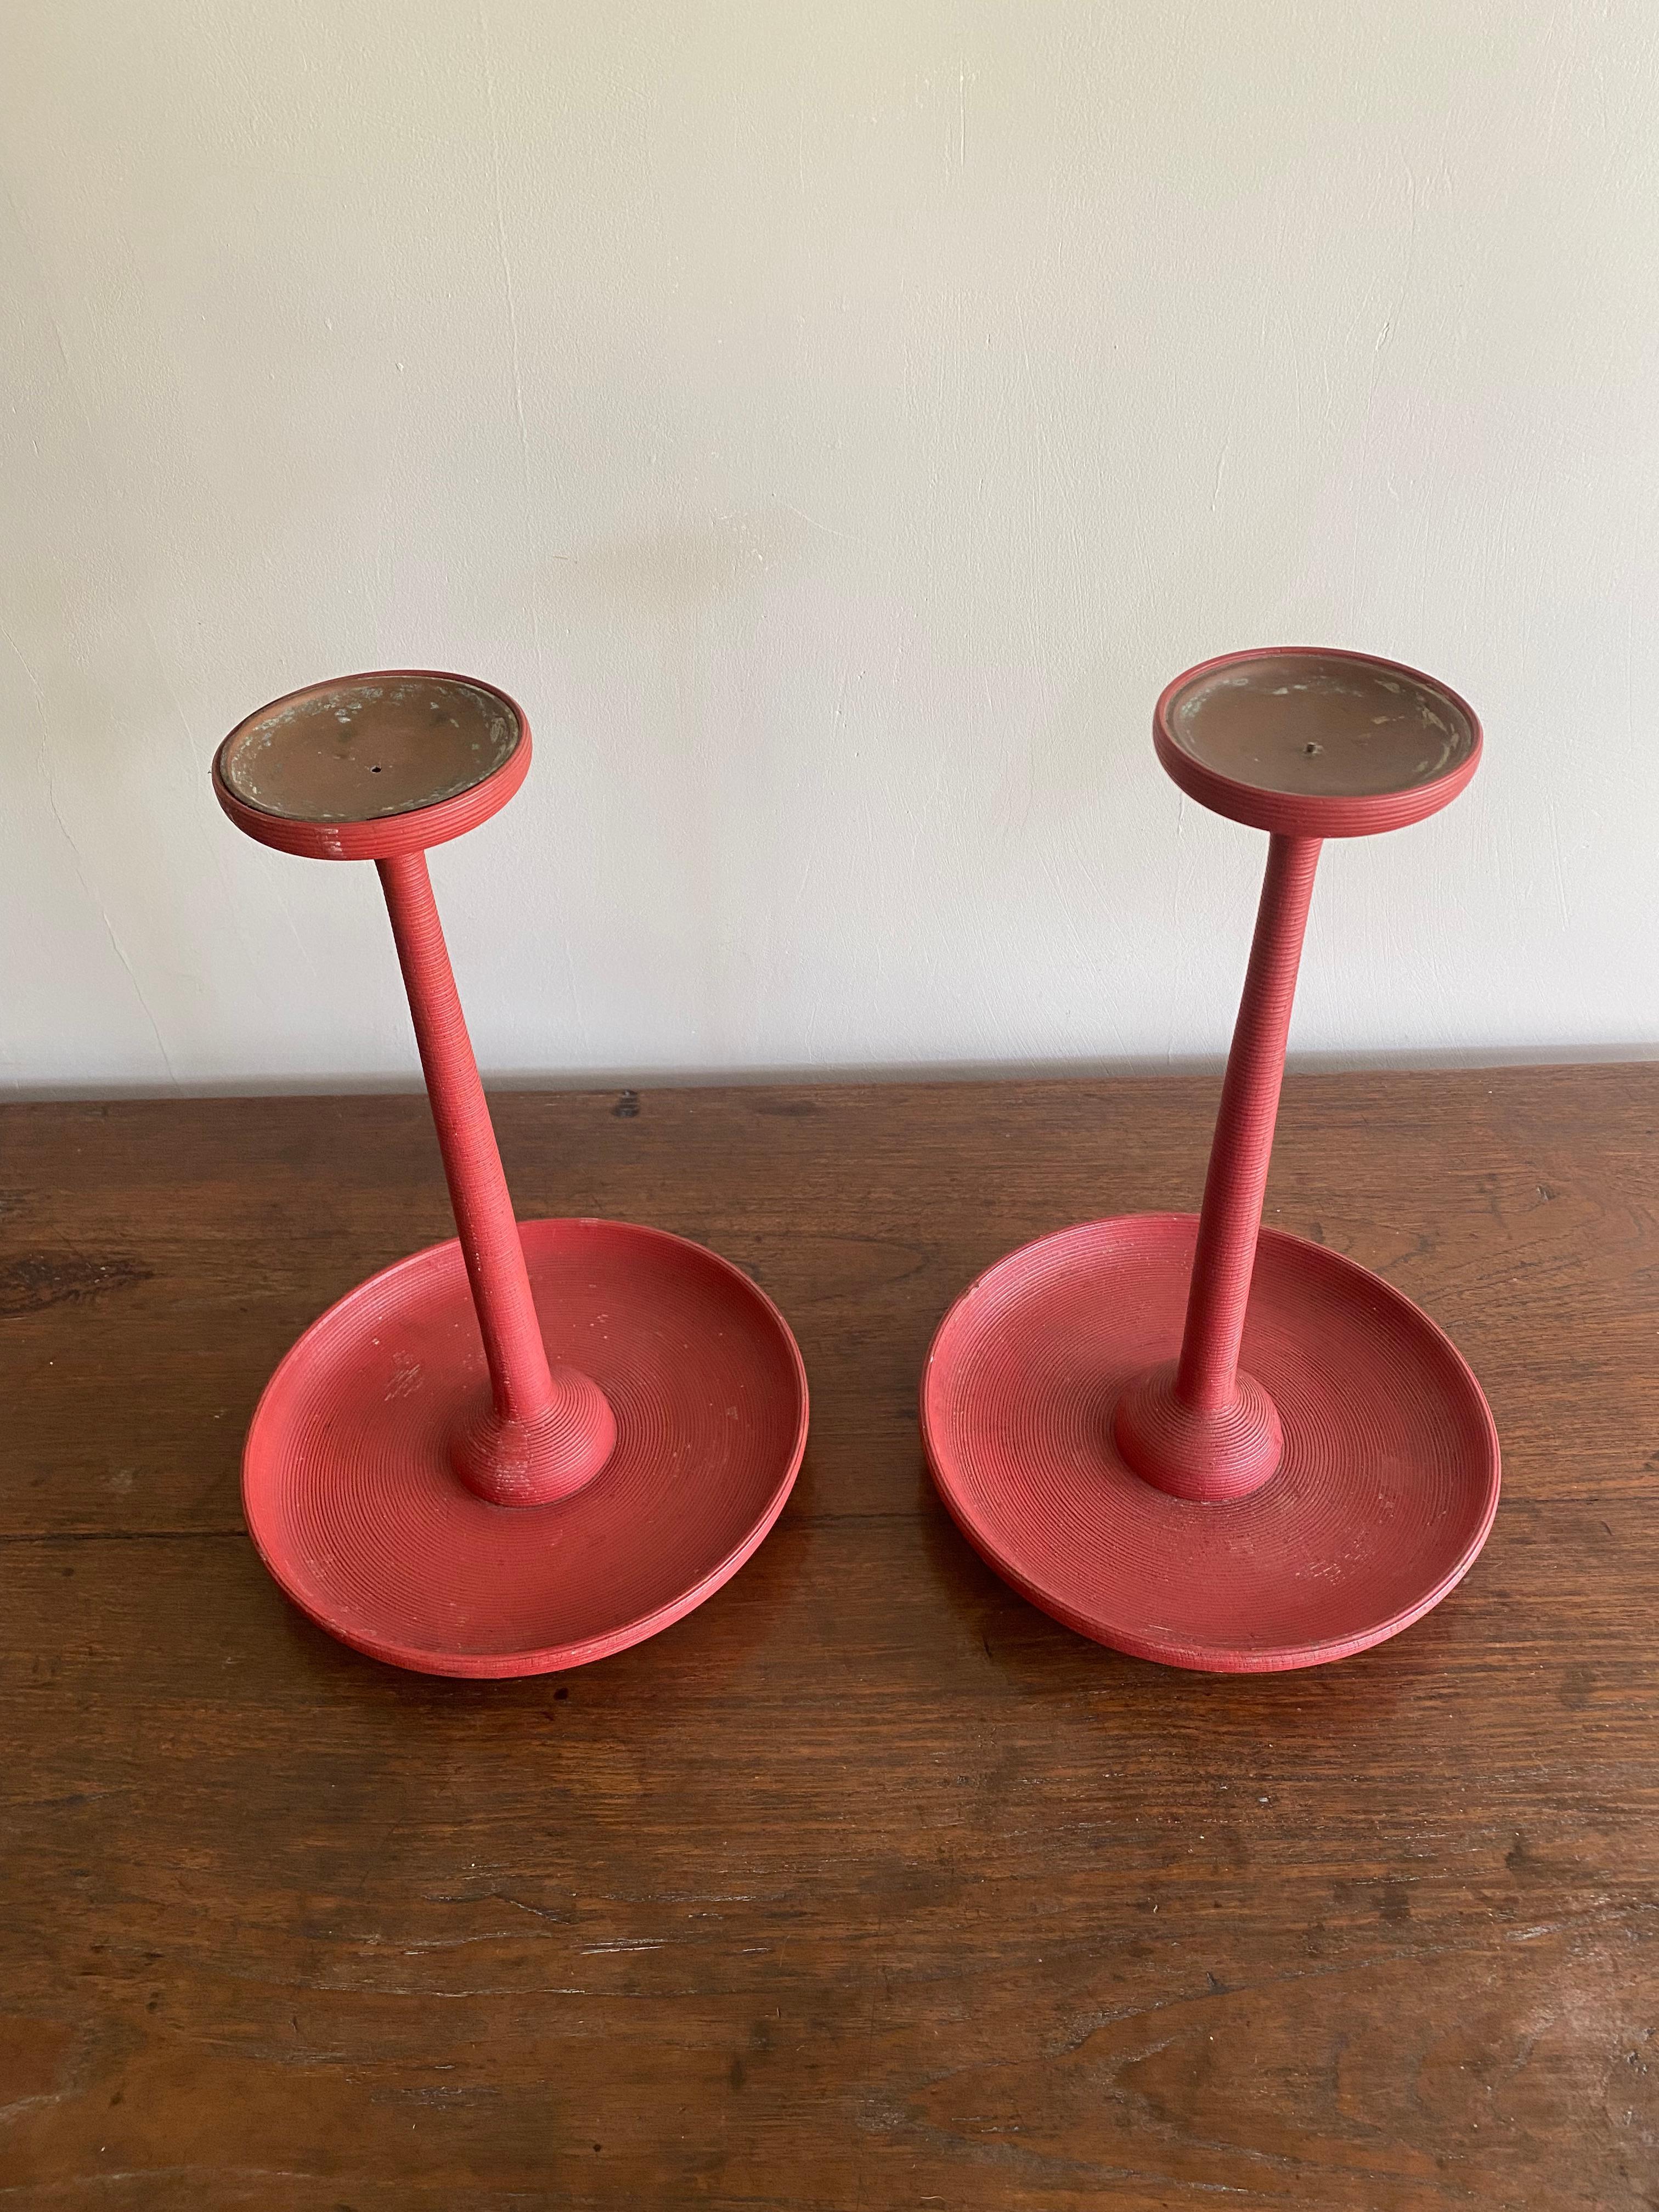 This stunning pair of Japanese red lacquered candle holders are exceptionally rare. They feature an elegant circular design with full height ribbed patterning. They are crafted from wood and a bright red lacquer coating. 

Dimensions: Height 36cm x